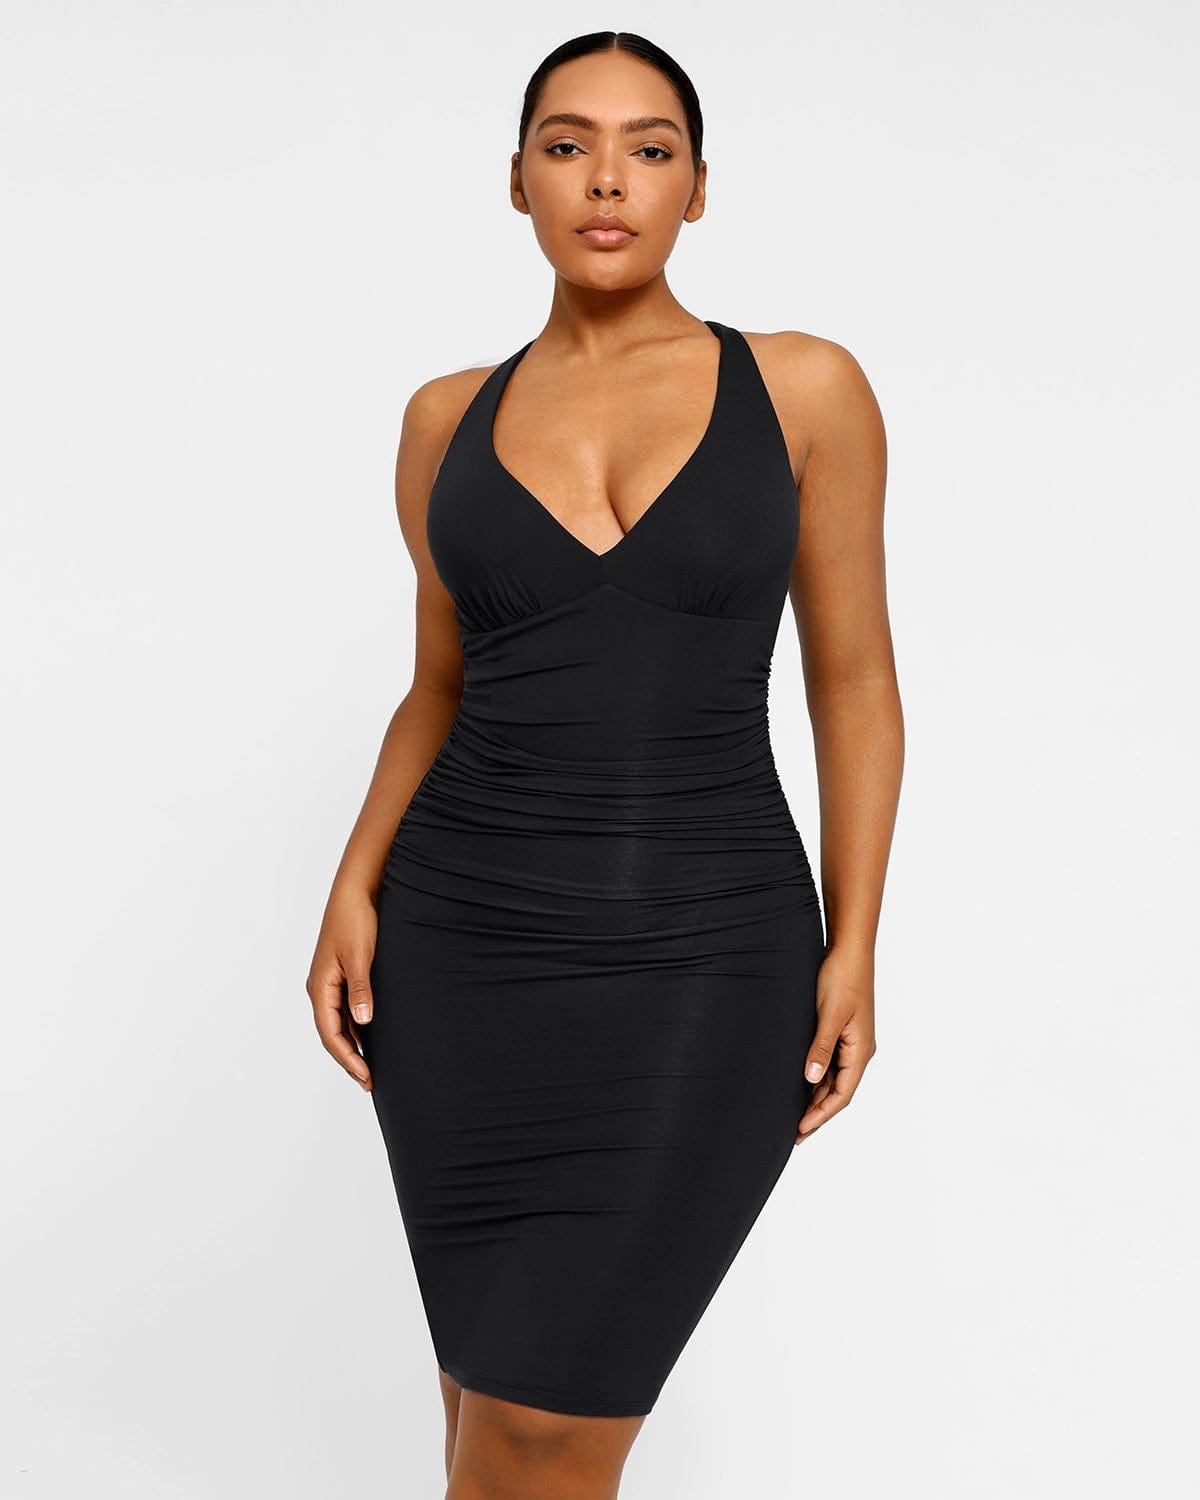 shapewear dress! It's currently on sale plus an extra 5% off wi